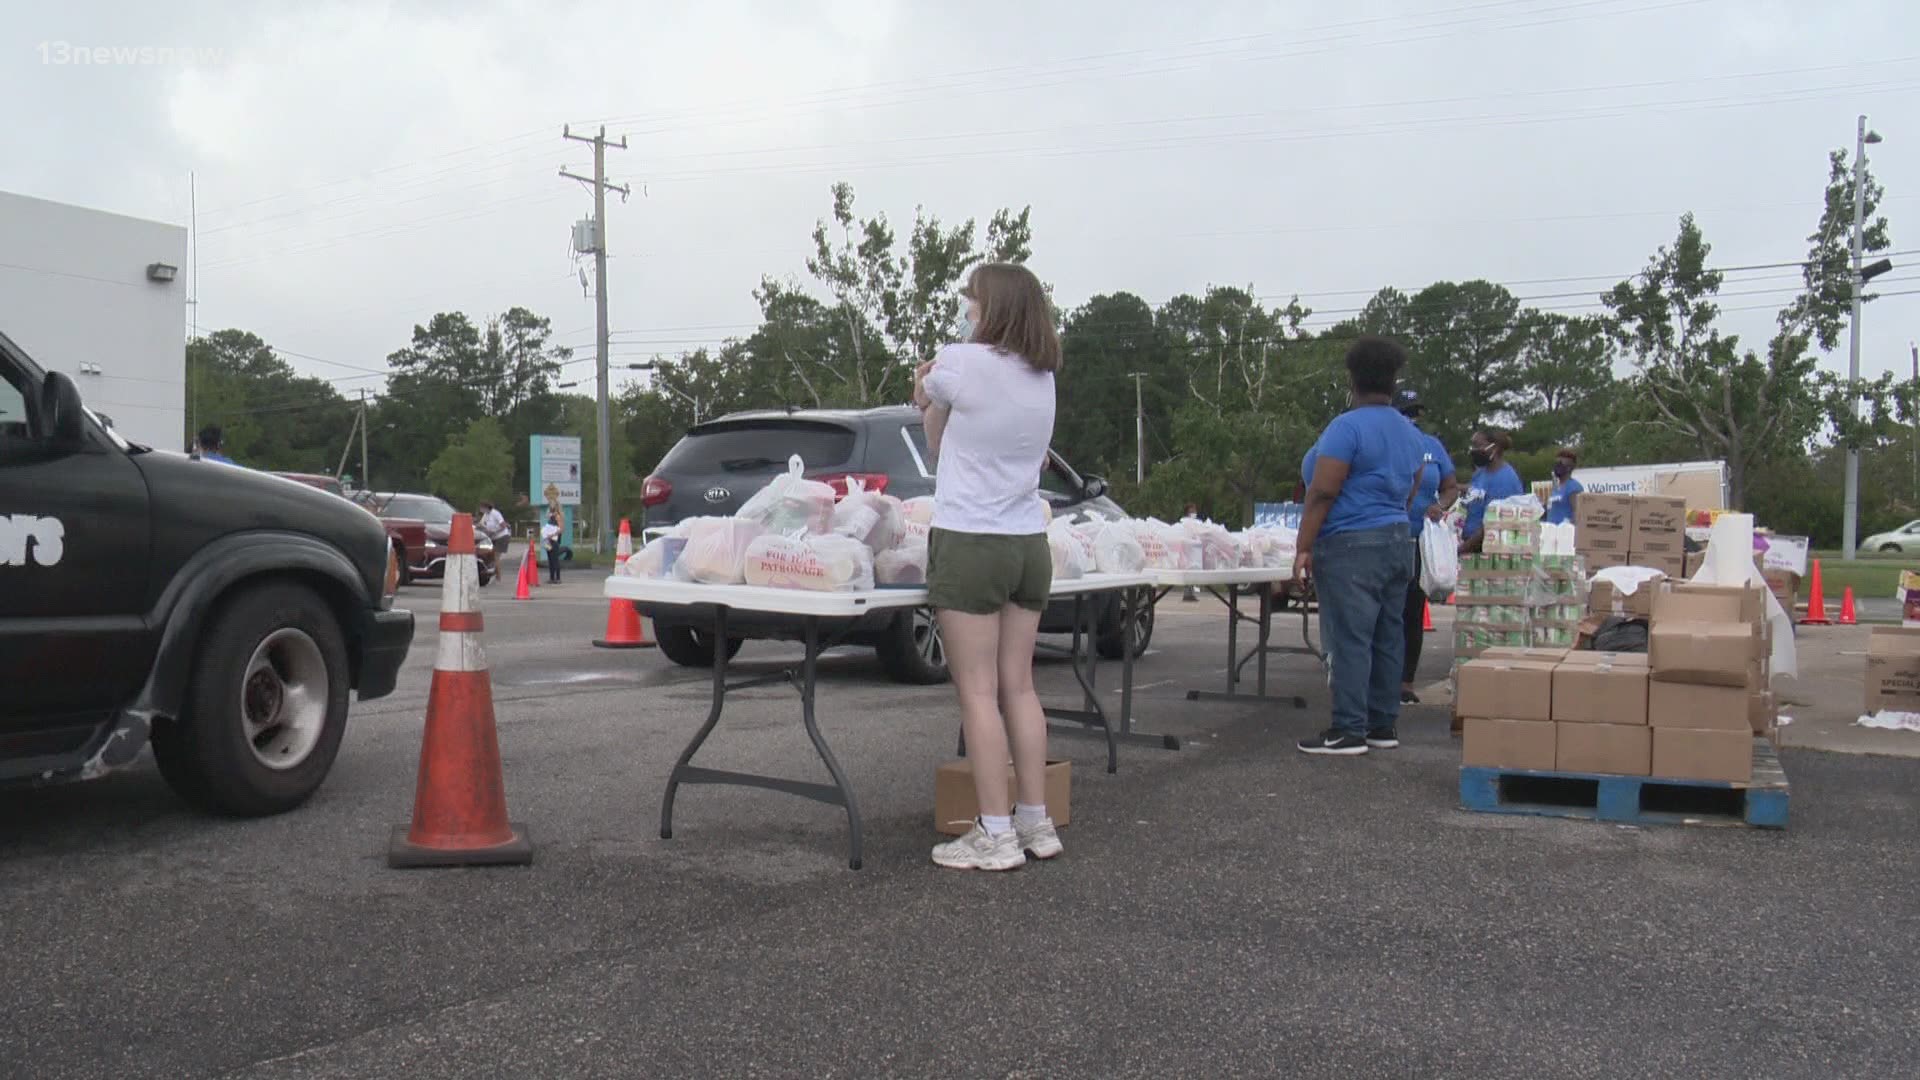 Volunteers gave out bags filled with non-perishable food.